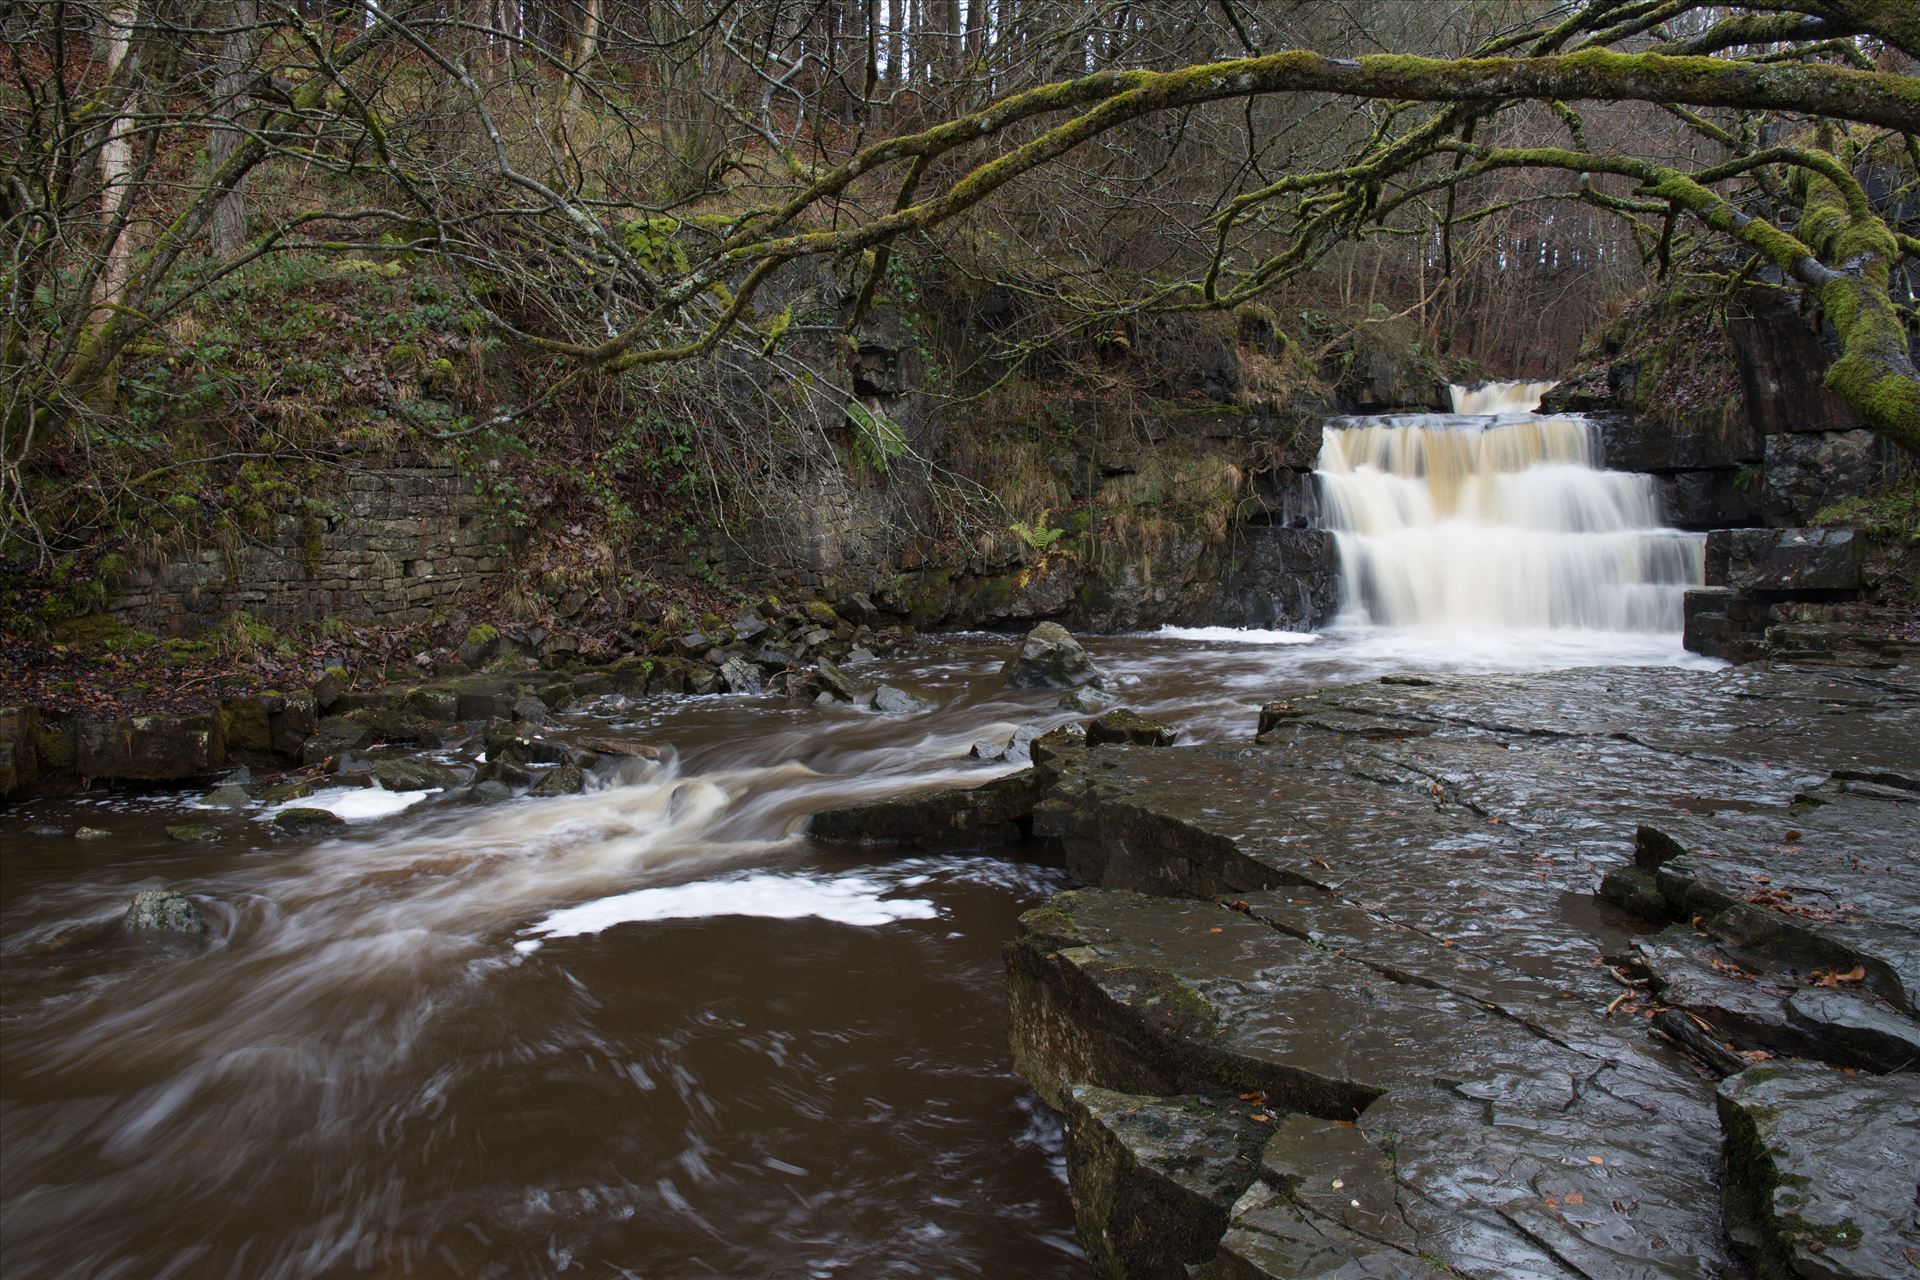 Summerhill Force - Summerhill Force is a picturesque waterfall in a wooded glade near Bowlees in Upper Teesdale. by philreay